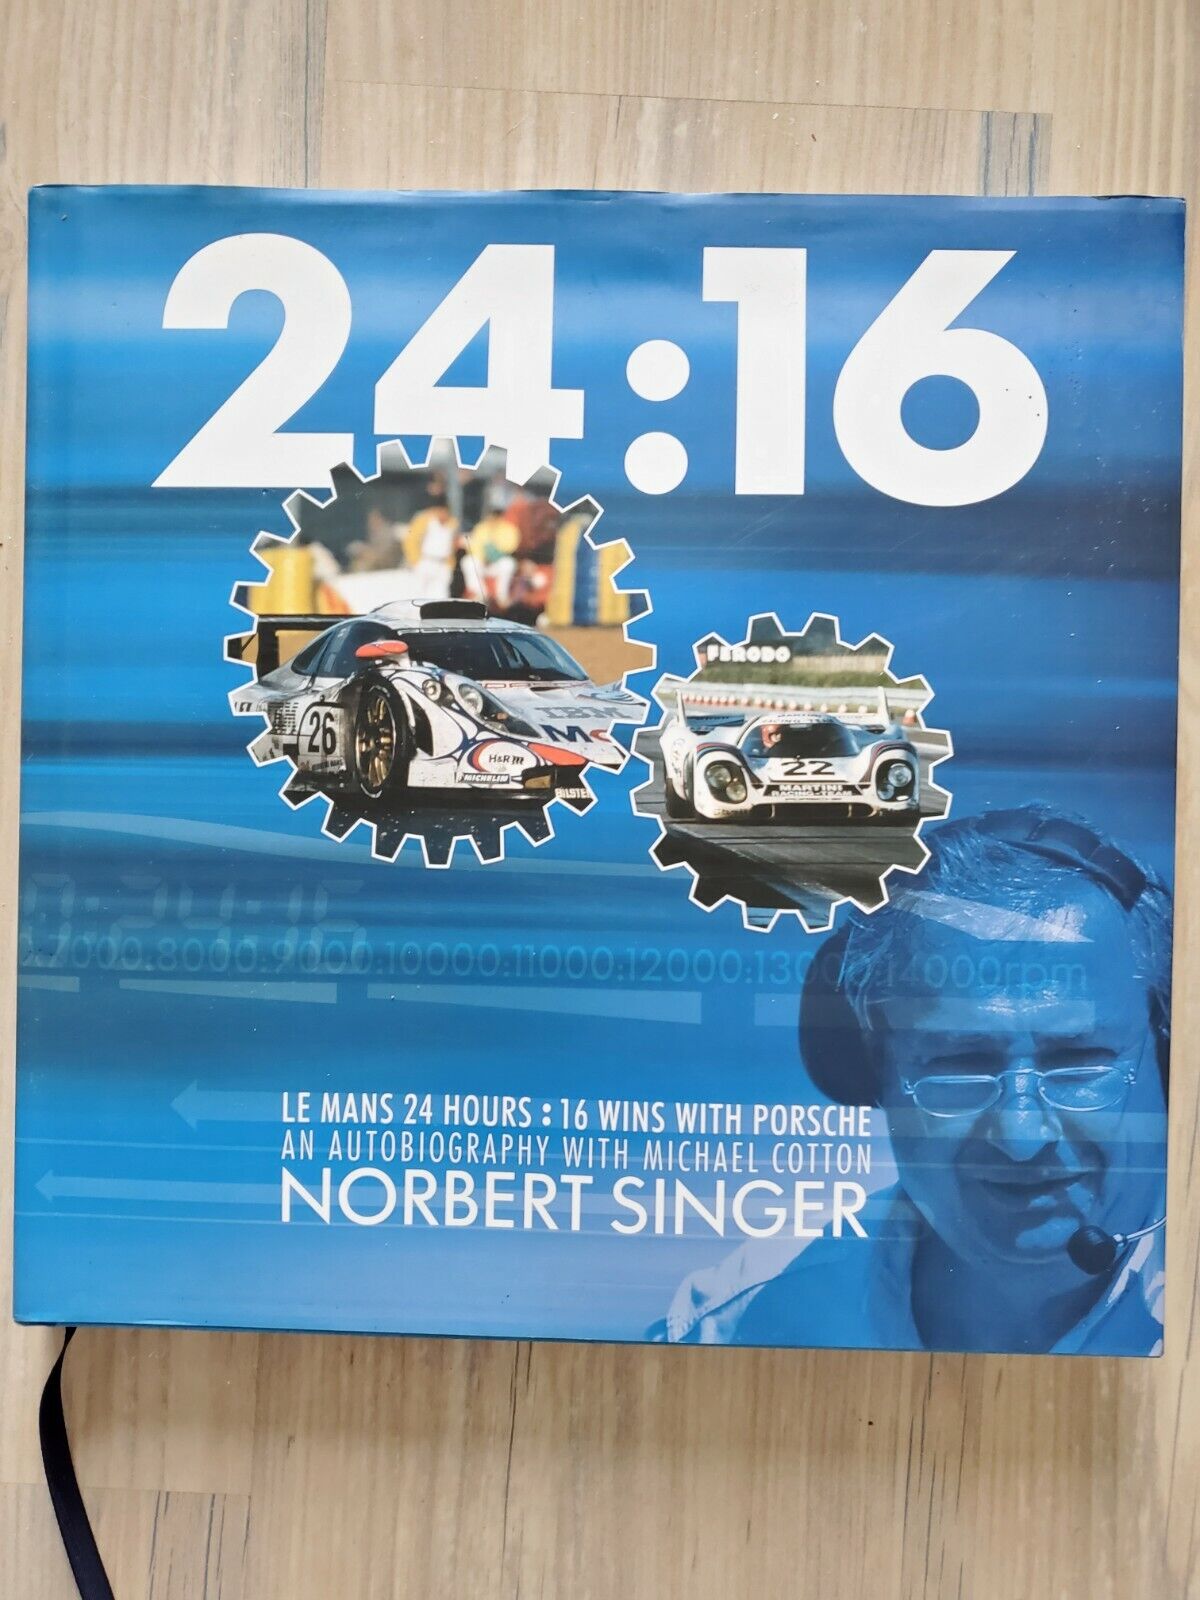 Book 24:16 Le Mans 24 Hours: 16 Wins with Porsche by Norber Singer Autobiography